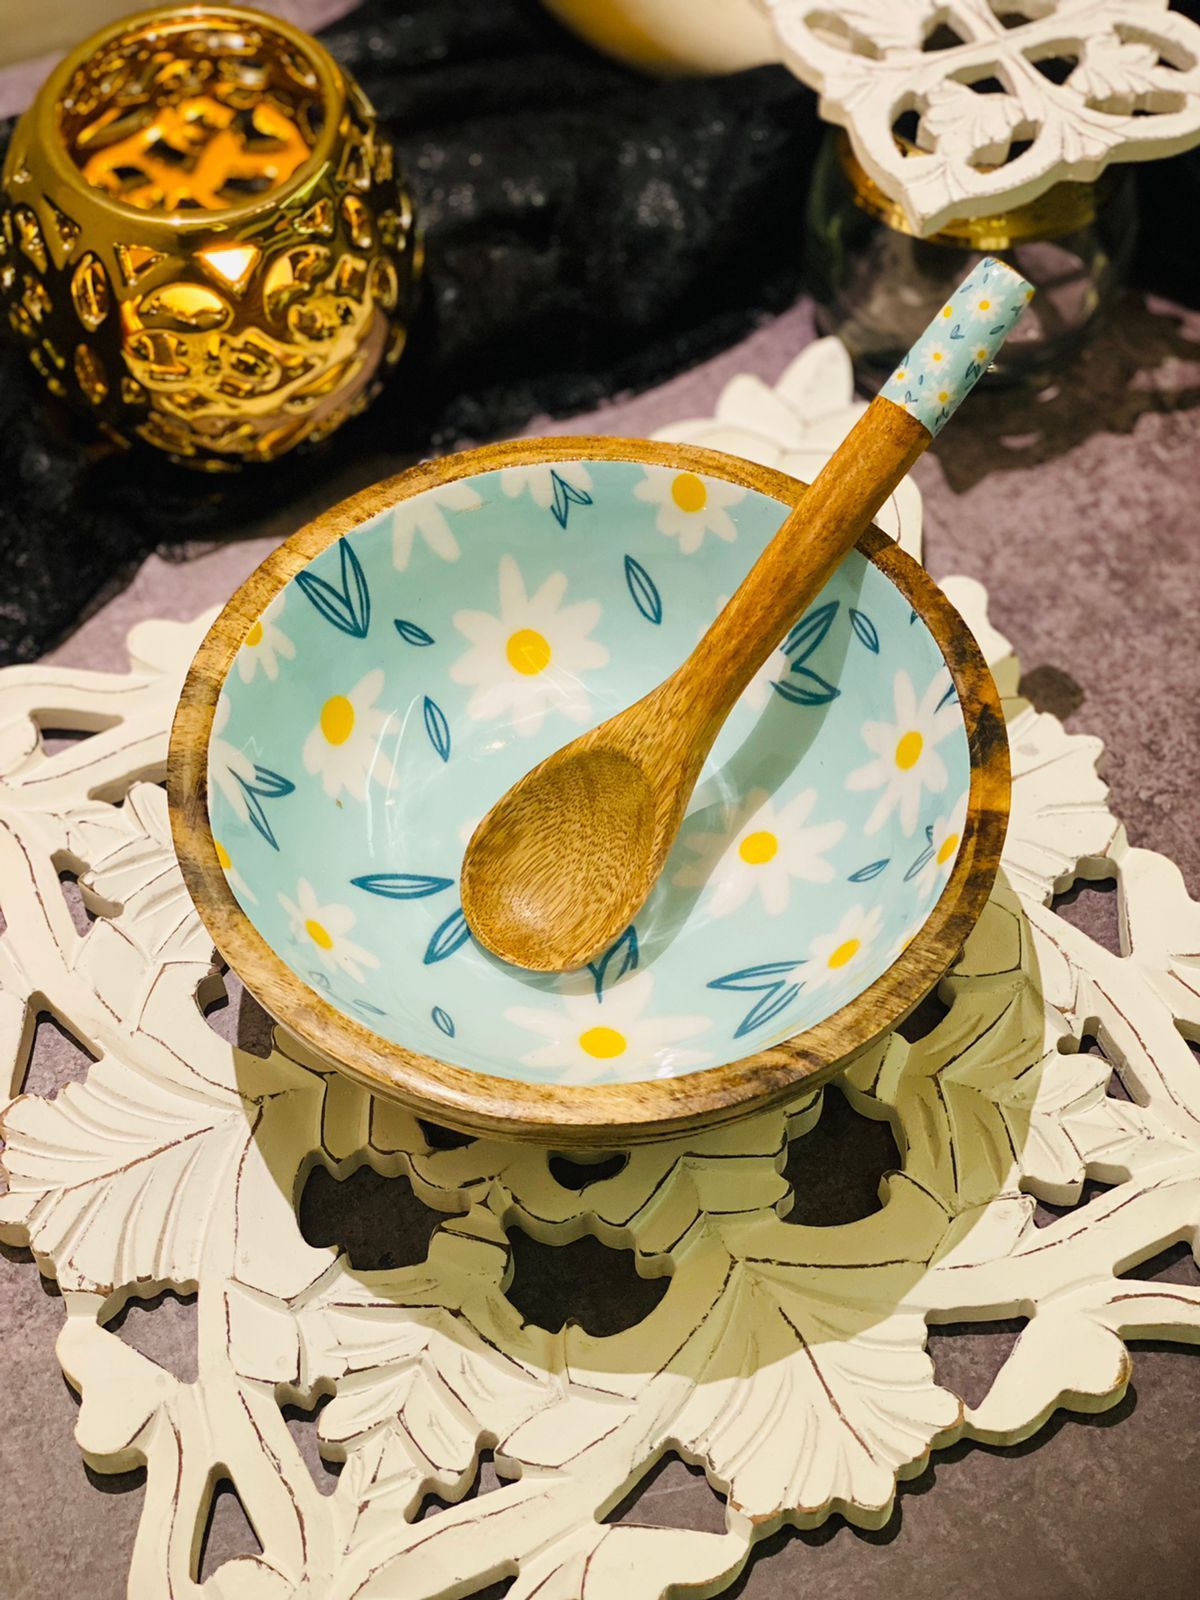 Designer Bowl and Spoon with Unique Boundary Design